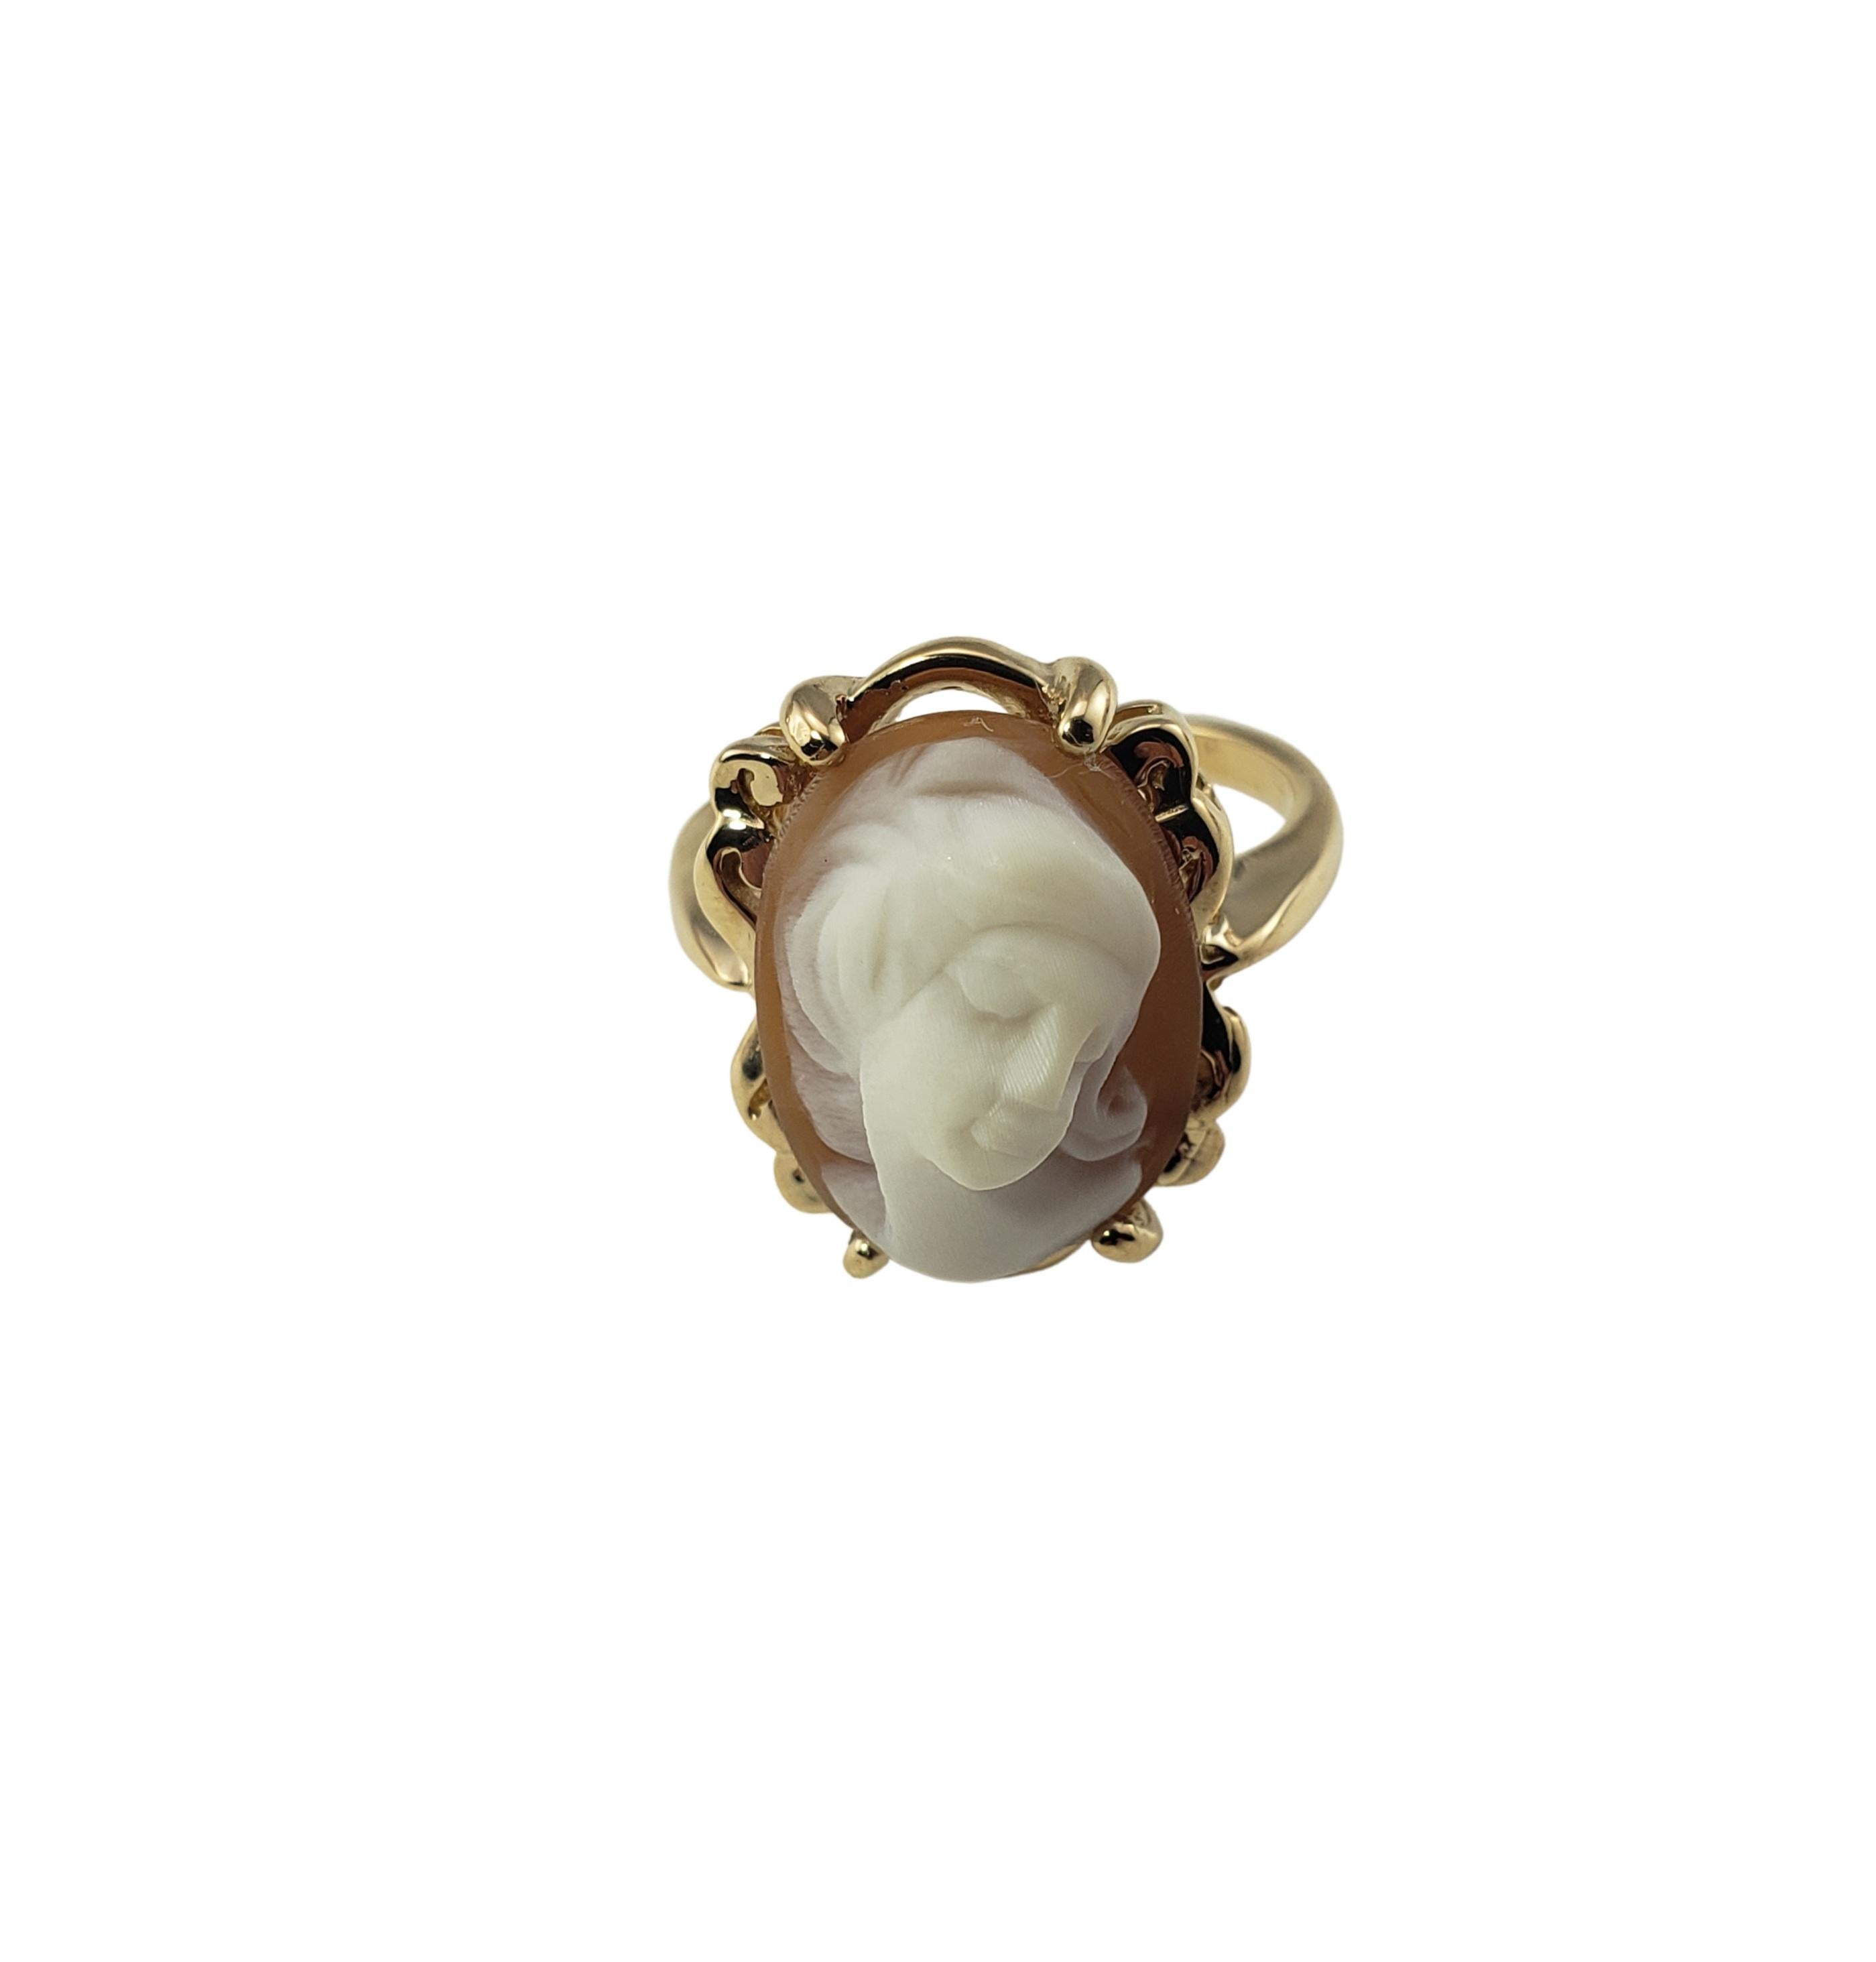 Vintage 14 Karat Yellow Gold Cameo Ring Size 3.75-

This elegant cameo ring features a lovely lady in profile set in beautifully detailed 14K yellow gold. Top of ring measures
16 mm x 14 mm. Shank: 1 mm.

Ring Size: 3.75

Weight: 2.2 dwt. / 3.5